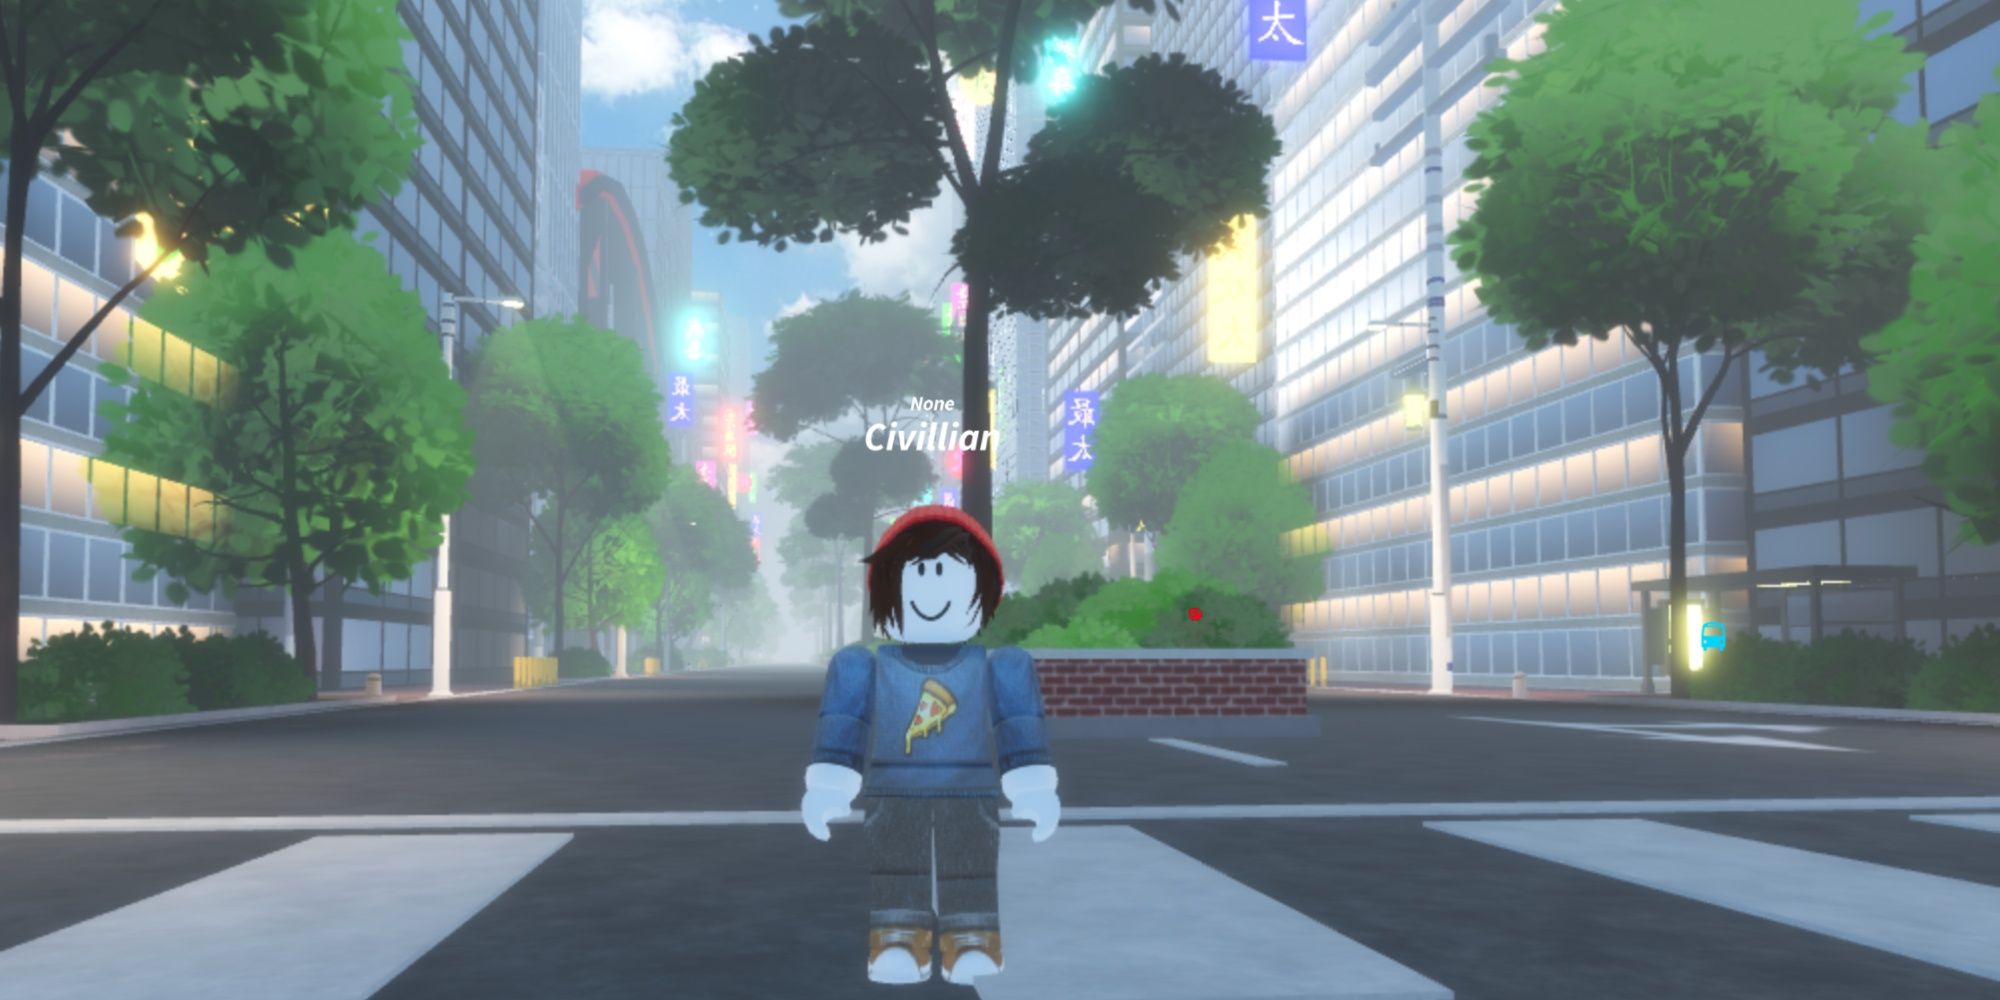 OUr character stands in the streets of Era of Quirk in Roblox